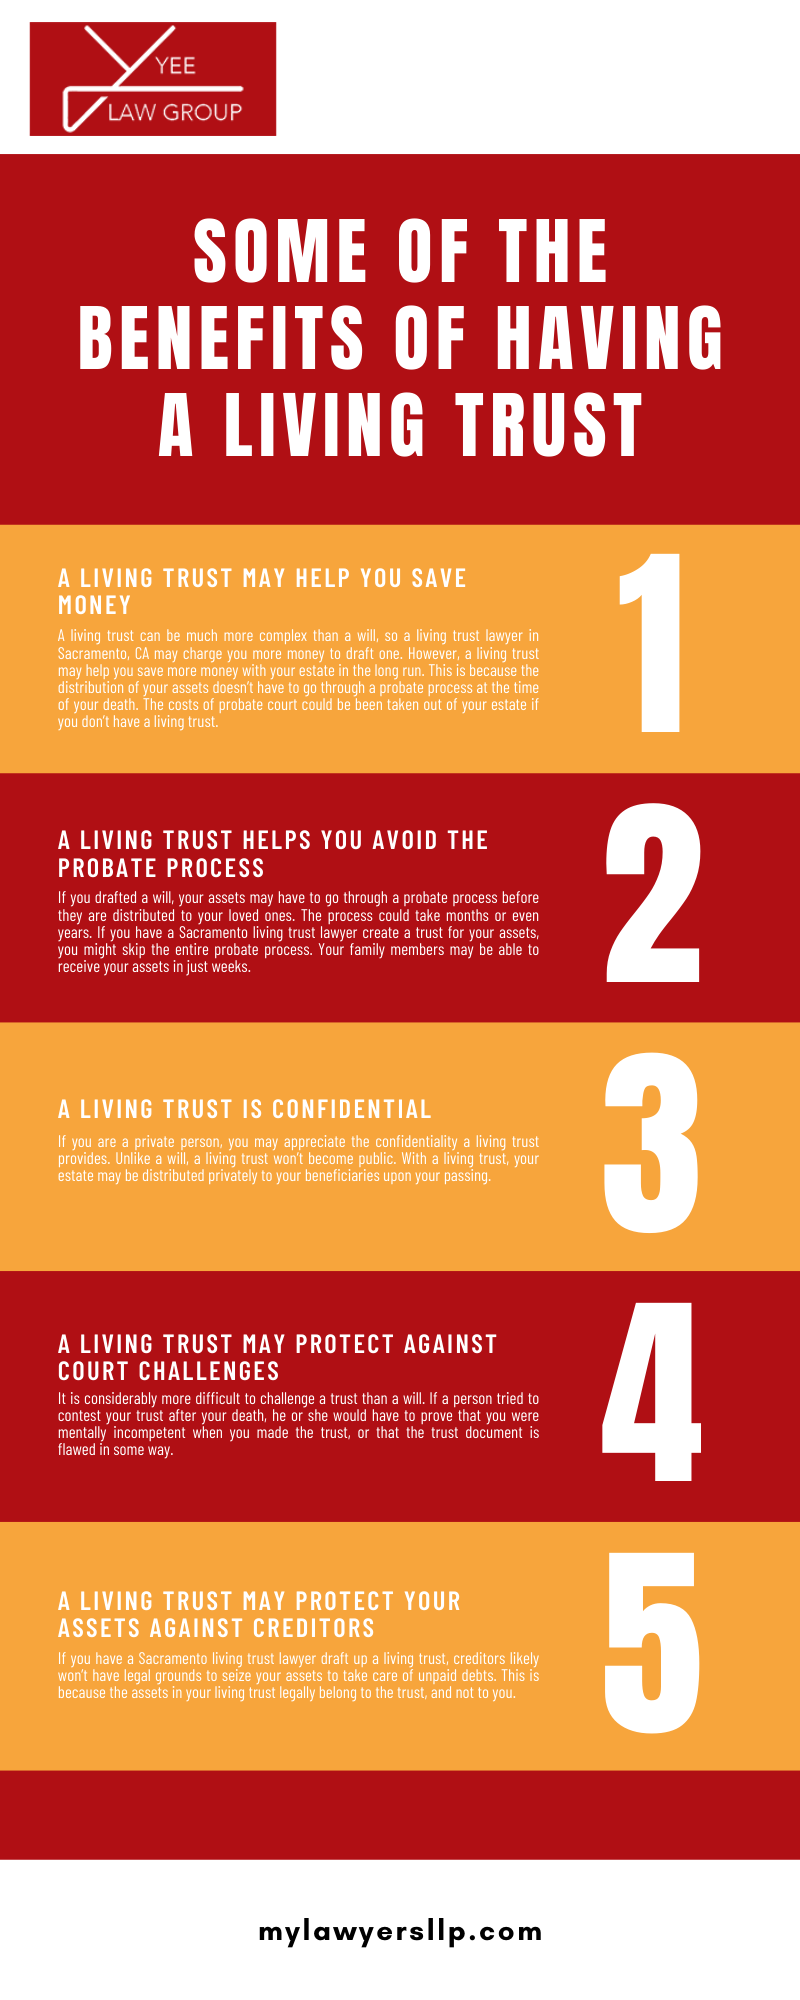 SOME OF THE BENEFITS OF HAVING A LIVING TRUST INFOGRAPHIC